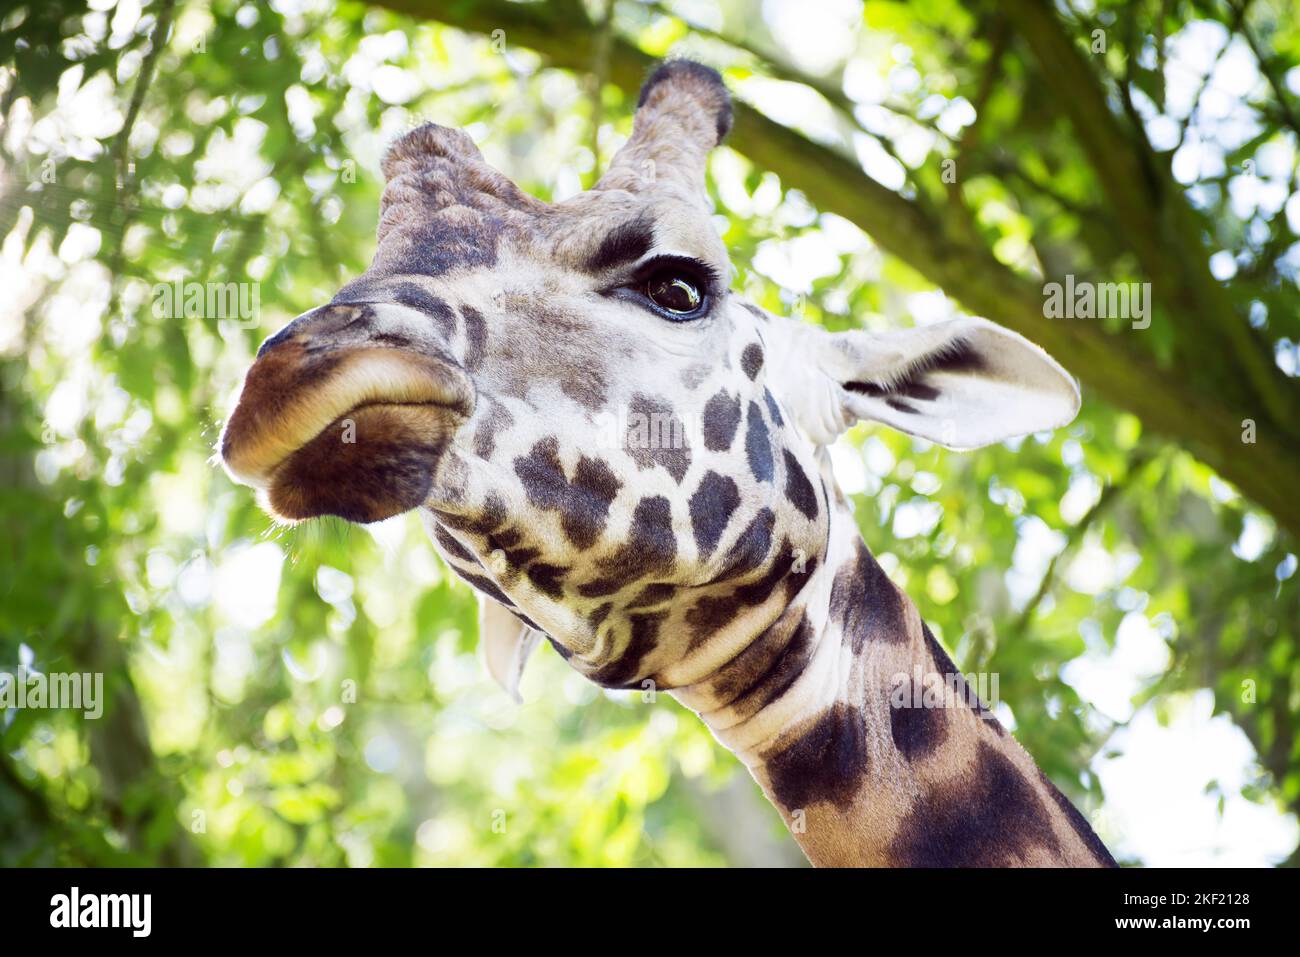 A big giraffe head portrait with angry facial expression looking down from top in front of green foliage. Stock Photo